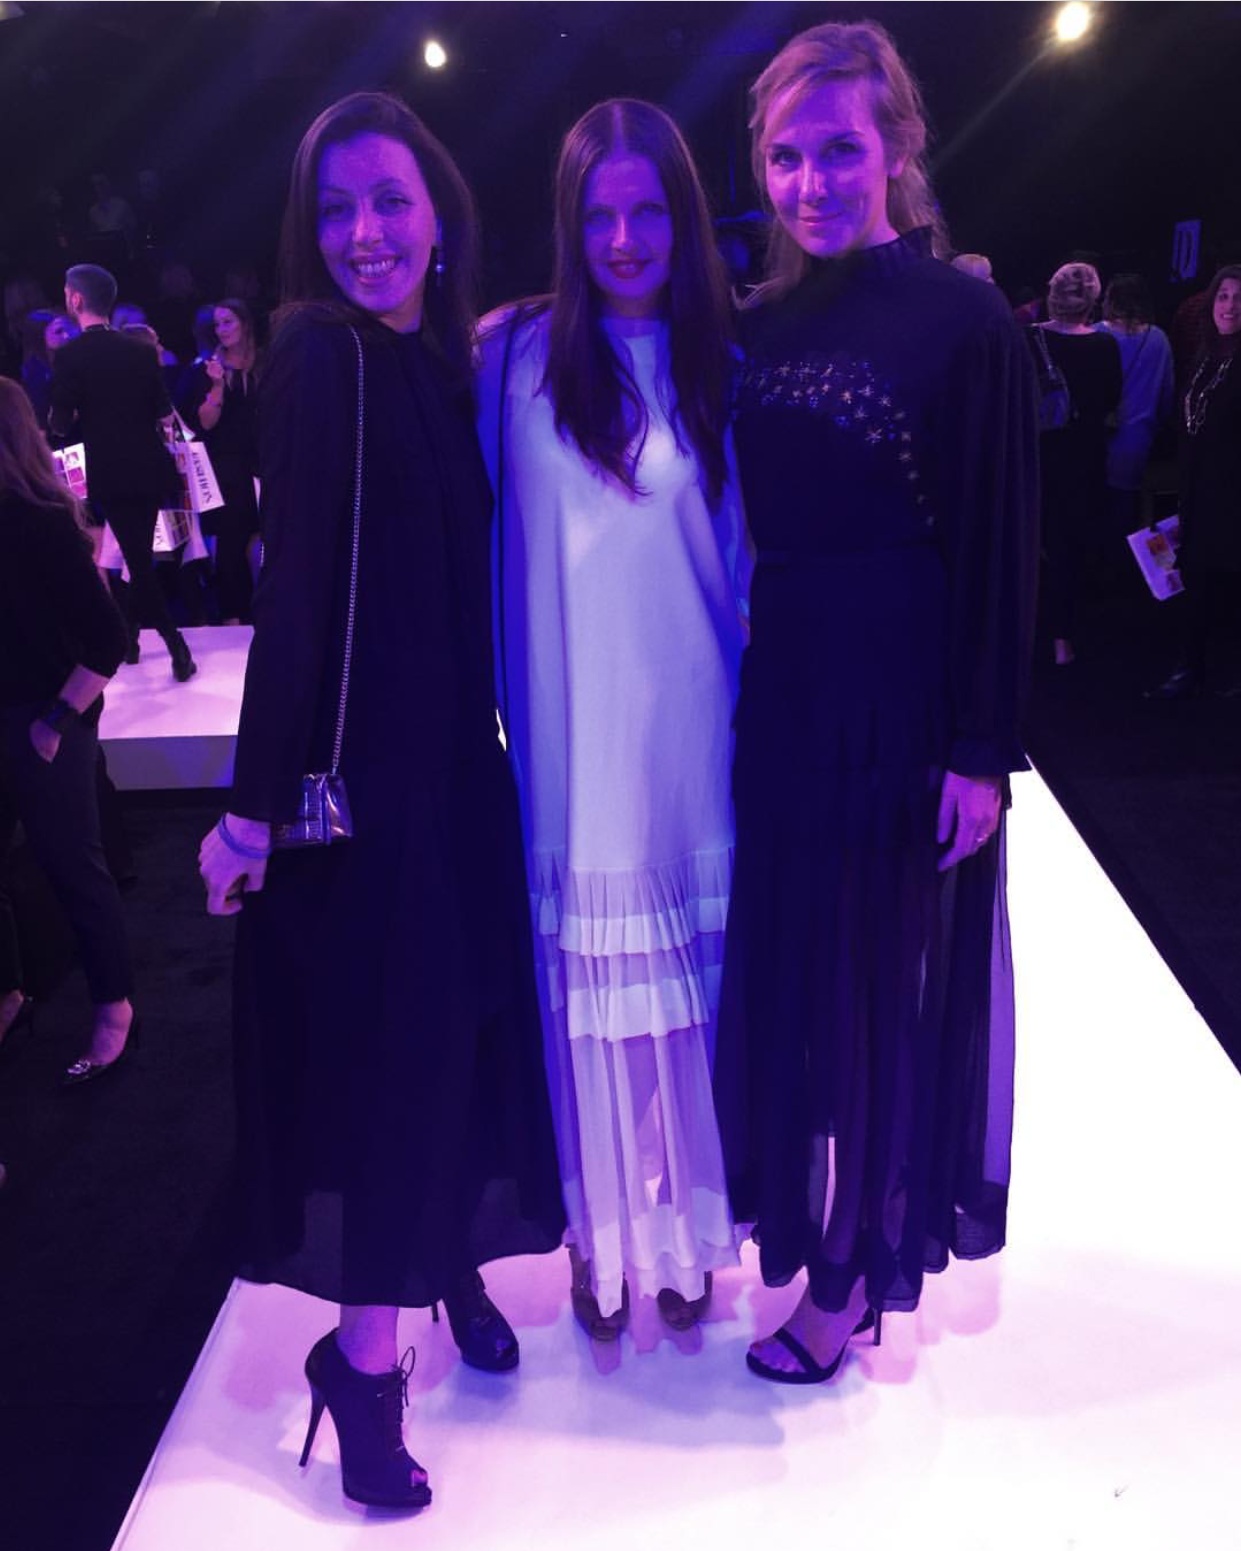  Milena, Valentina &amp; Valentia’s Creative Director, Tereza, photographer based in New-York and Lana, space engineer from Seattle, all look radiant in silk chiffon dresses by Valentina &amp; Valentia.  